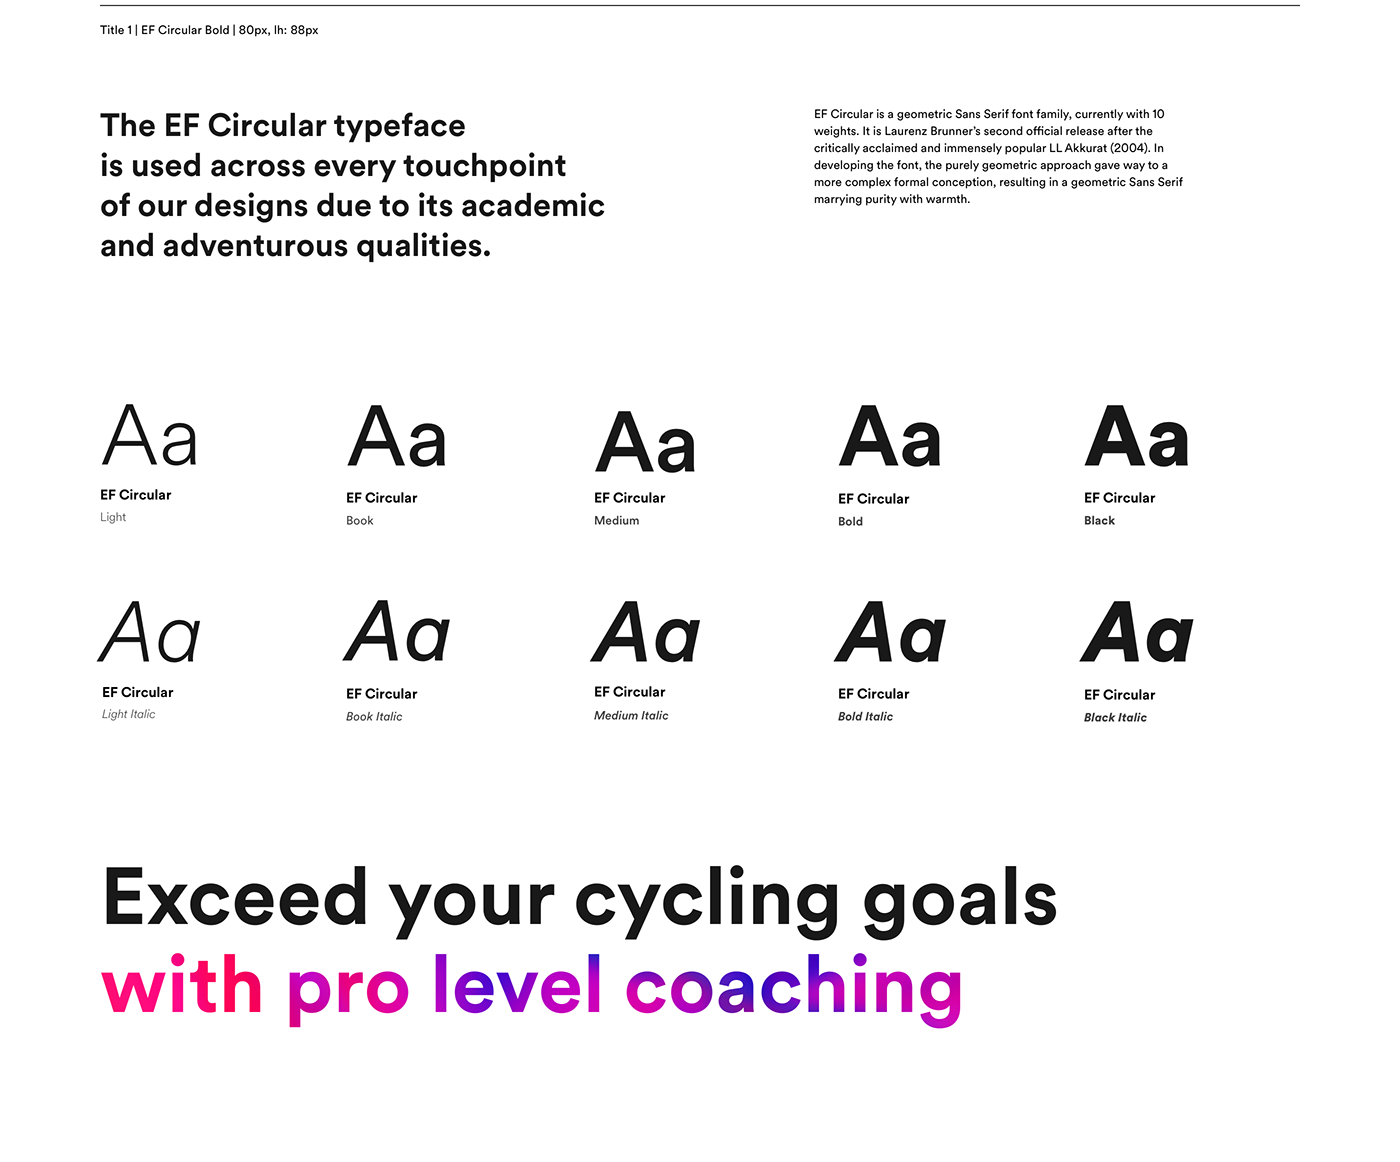 branding  clean coaching Cycling educationfirst efprocycling gradient minimal sports Webdesign